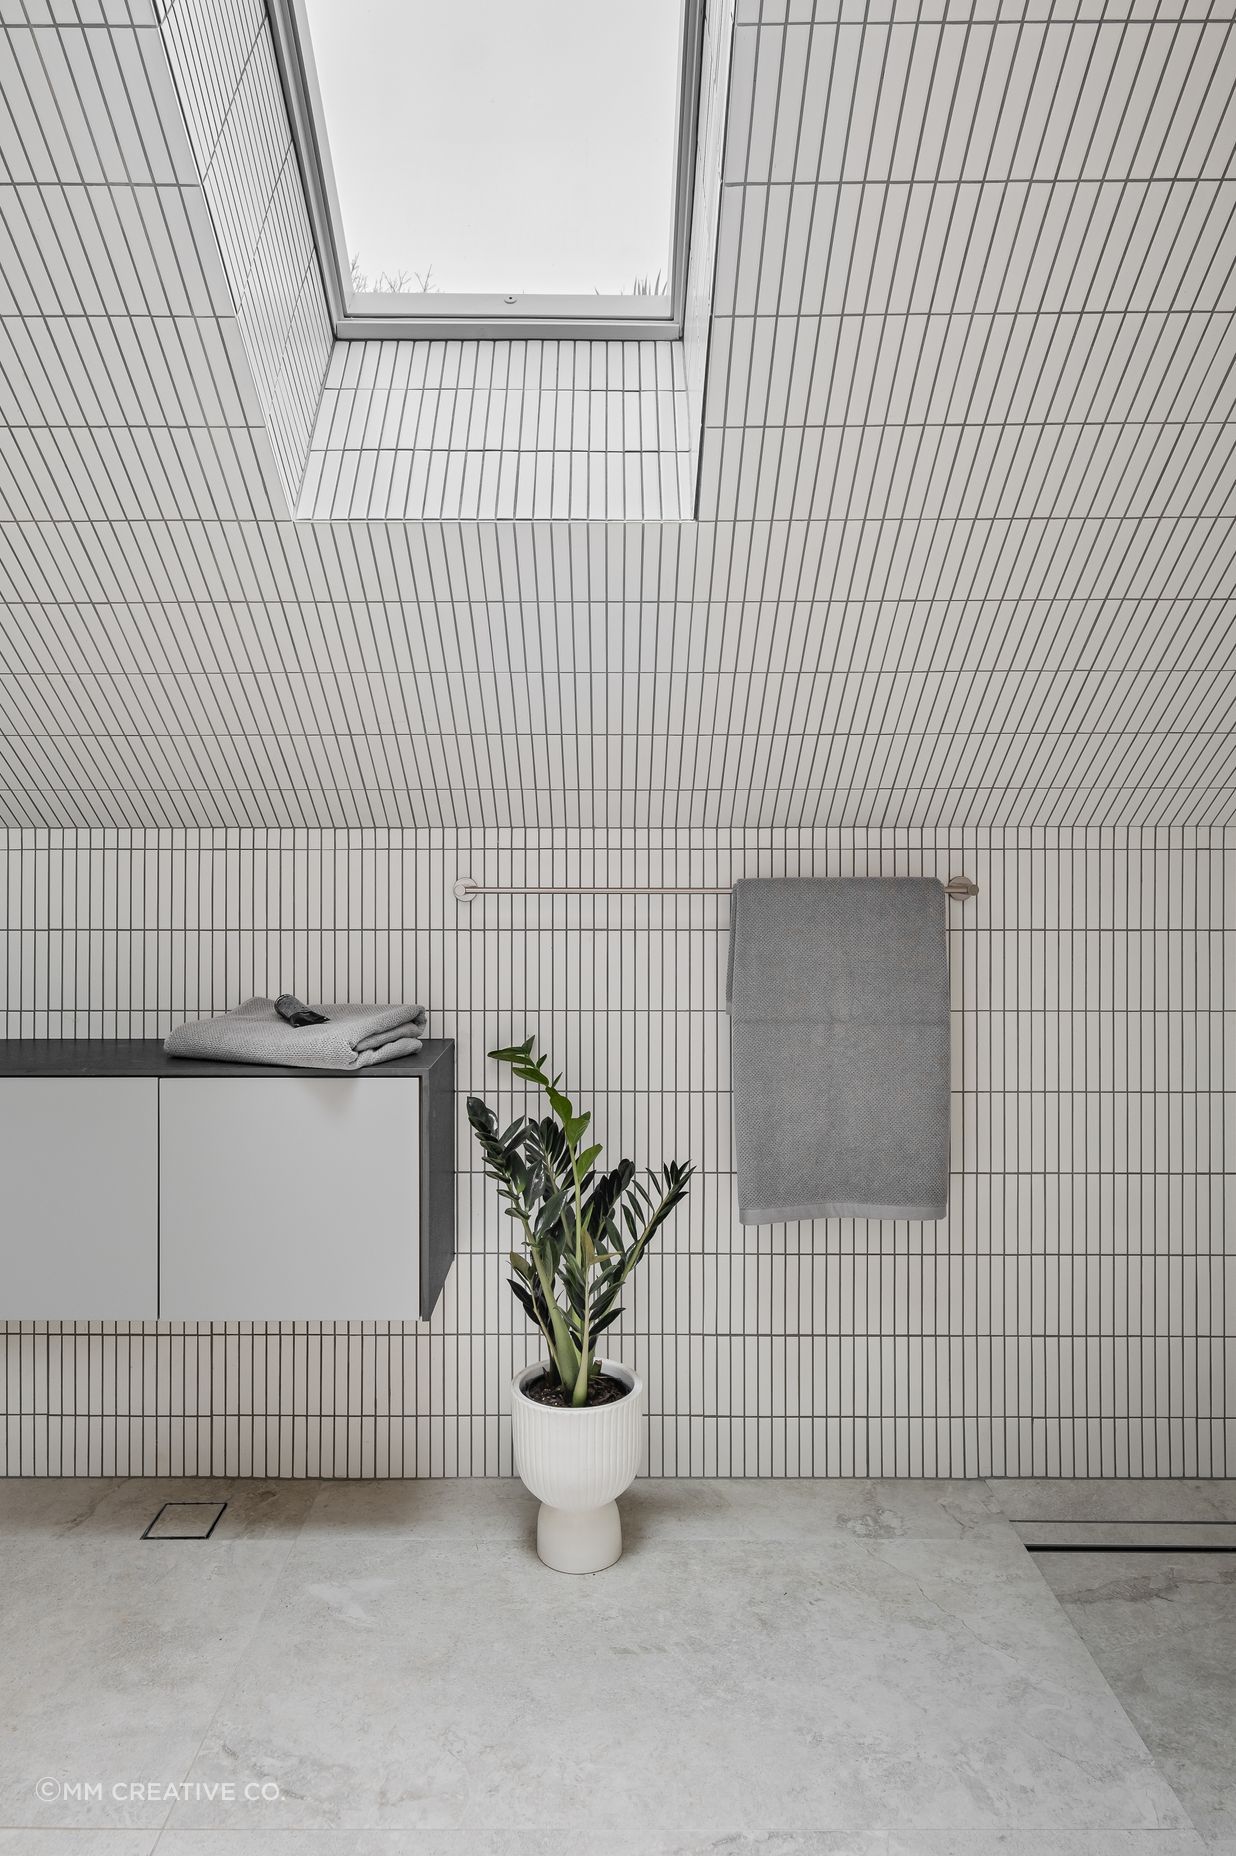 The upstairs bathroom is light and airy, featuring white finger tiles and skylights.